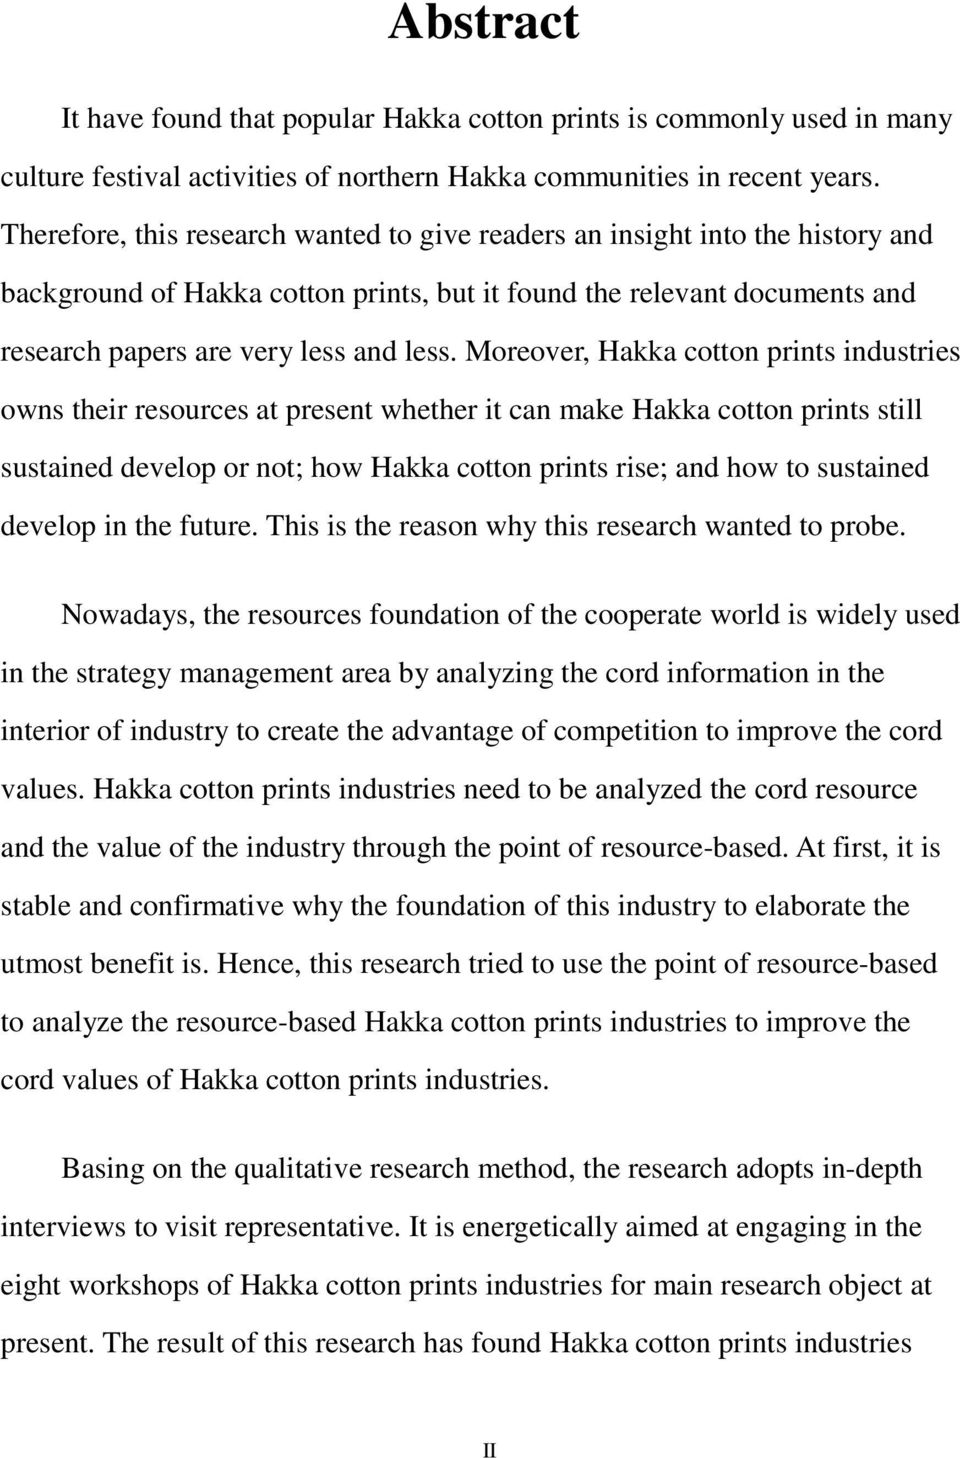 Moreover, Hakka cotton prints industries owns their resources at present whether it can make Hakka cotton prints still sustained develop or not; how Hakka cotton prints rise; and how to sustained